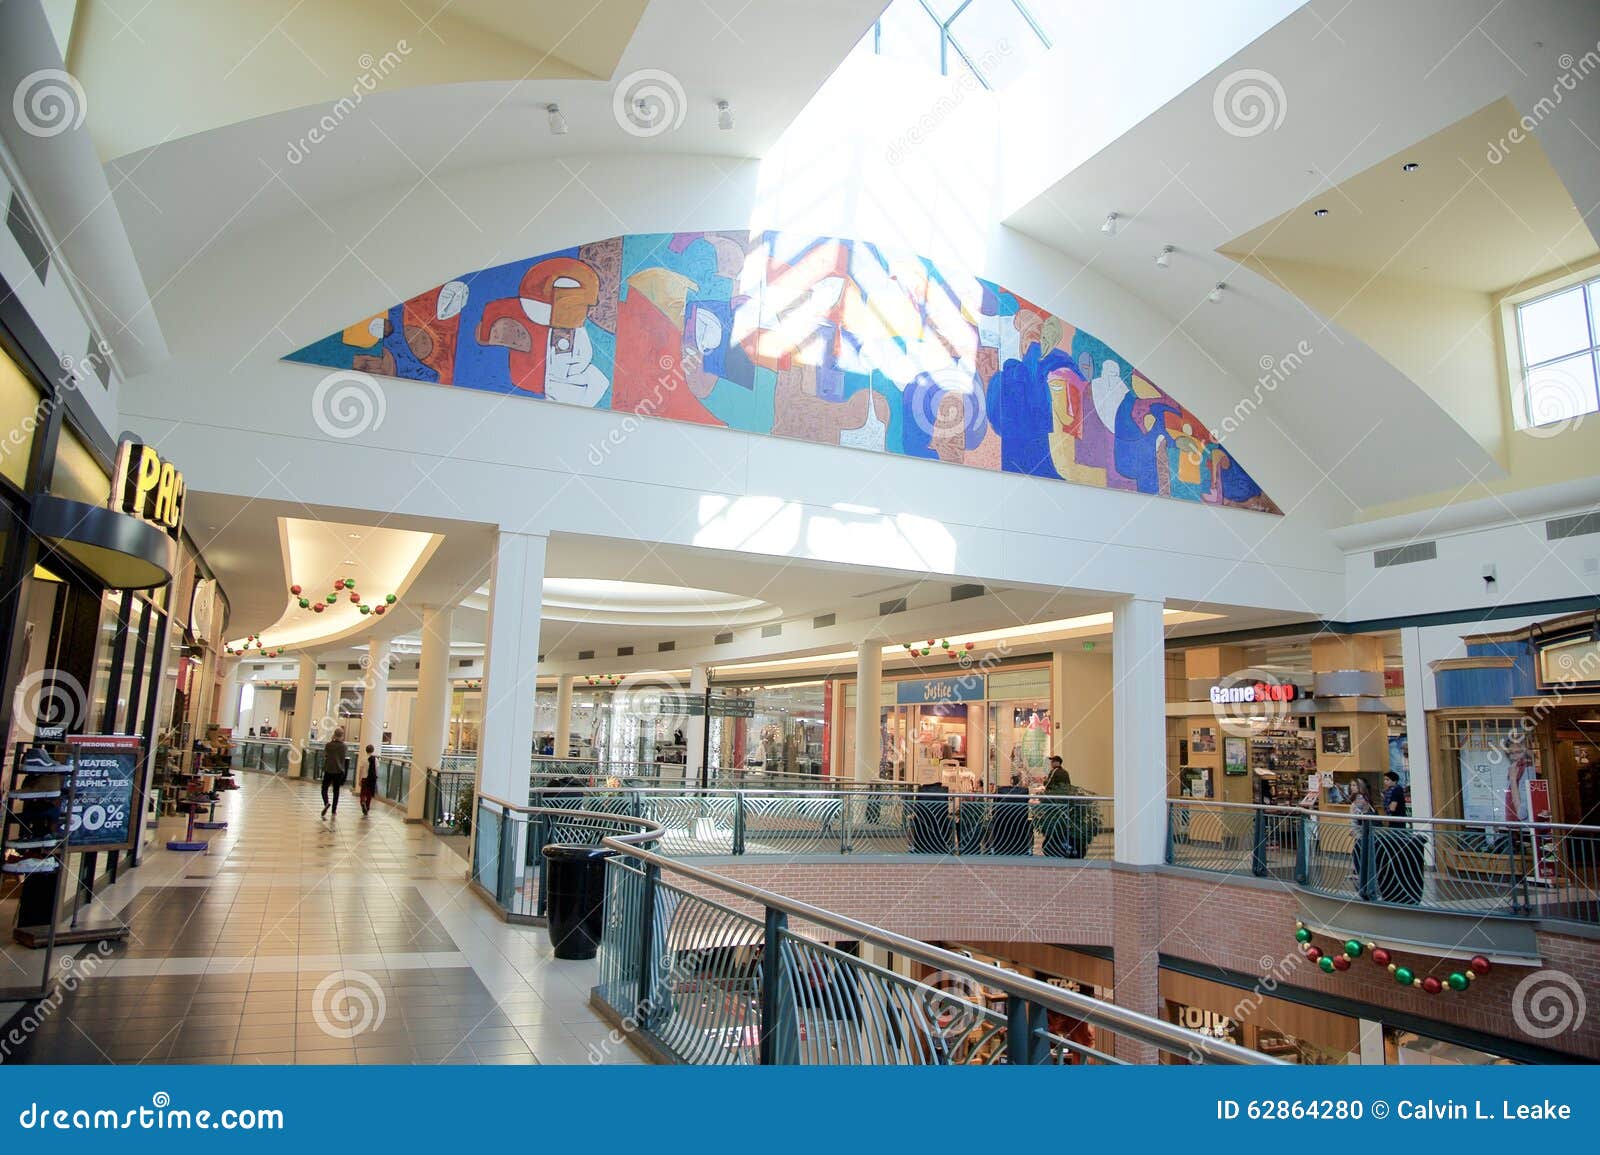 Art Work At The Wolfchase Mall, Memphis, Tennessee. Editorial Image - Image: 62864280